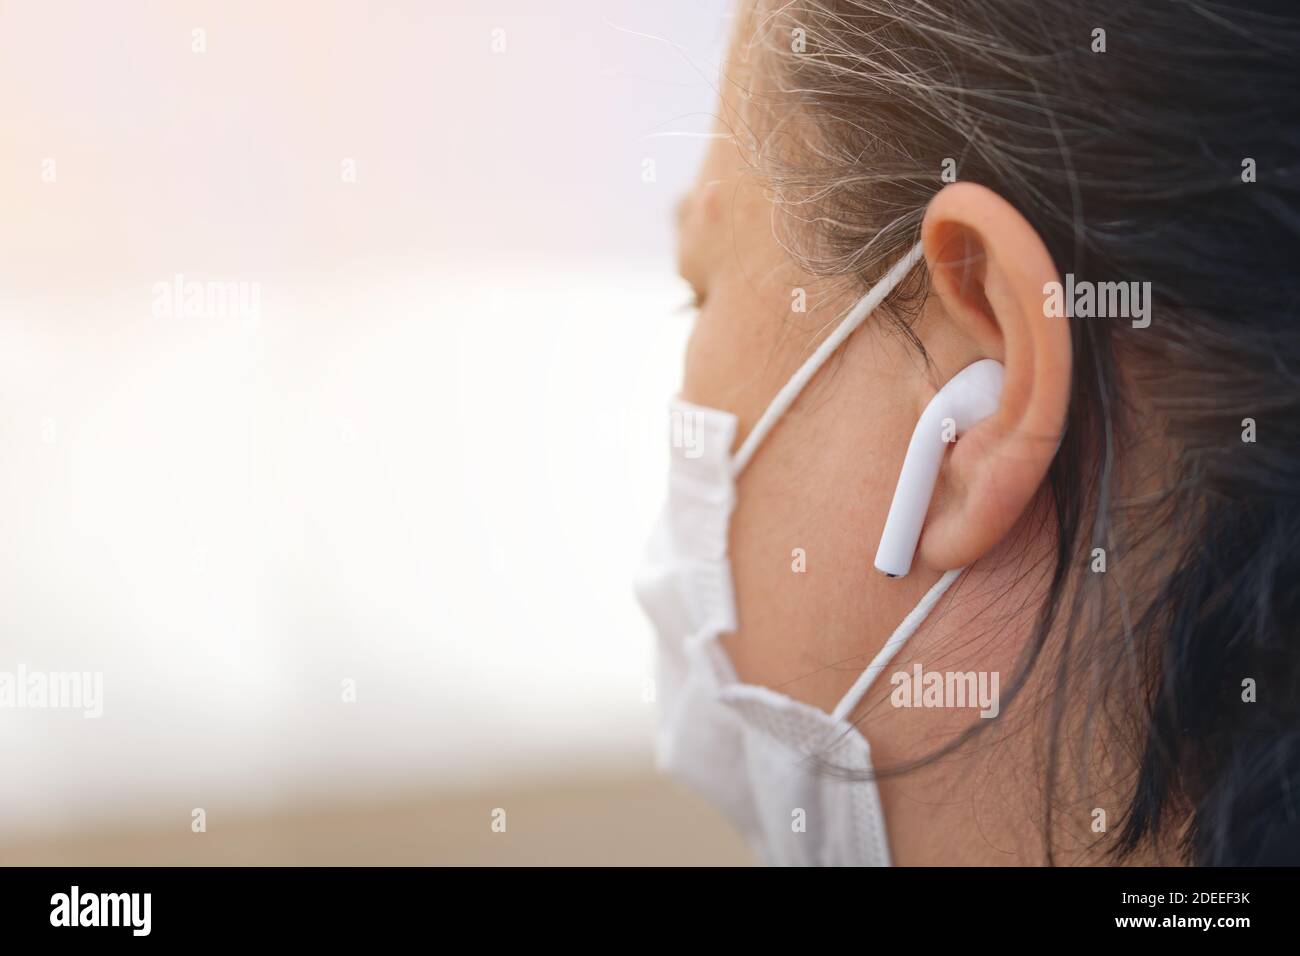 Woman wearing protective face mask and phone headset in Covid-19 corona virus epidemic disease. Stock Photo